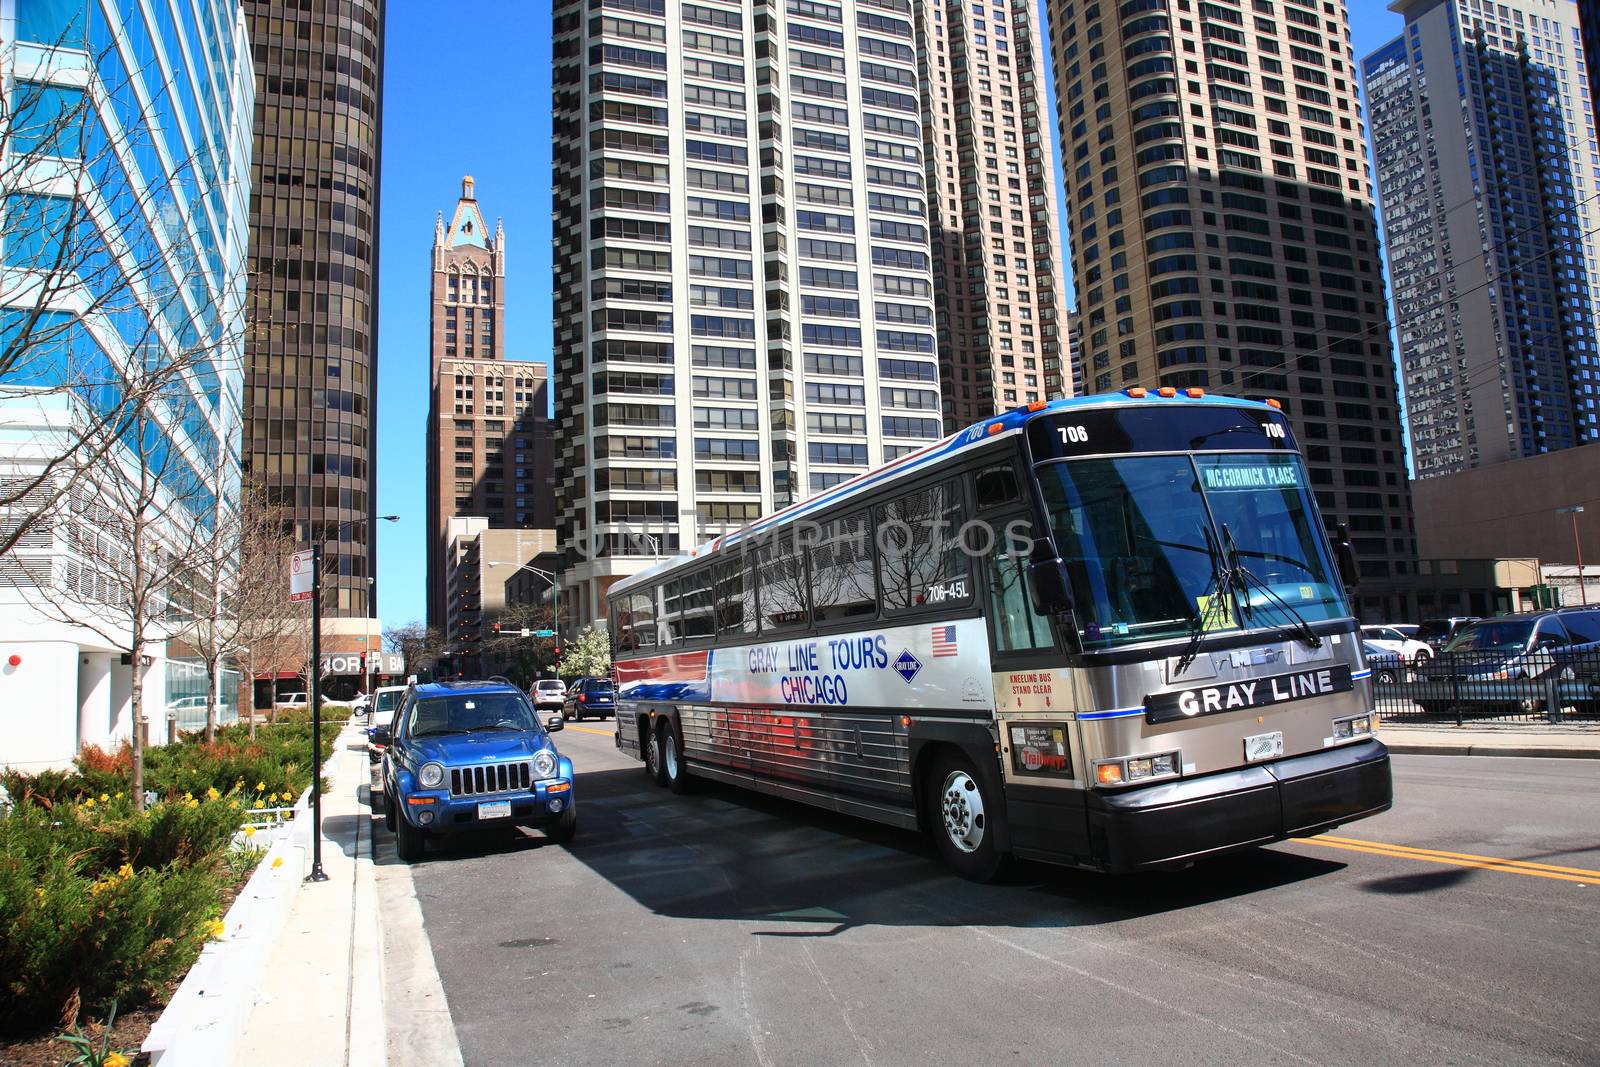 Chicago city street scene with tour bus.